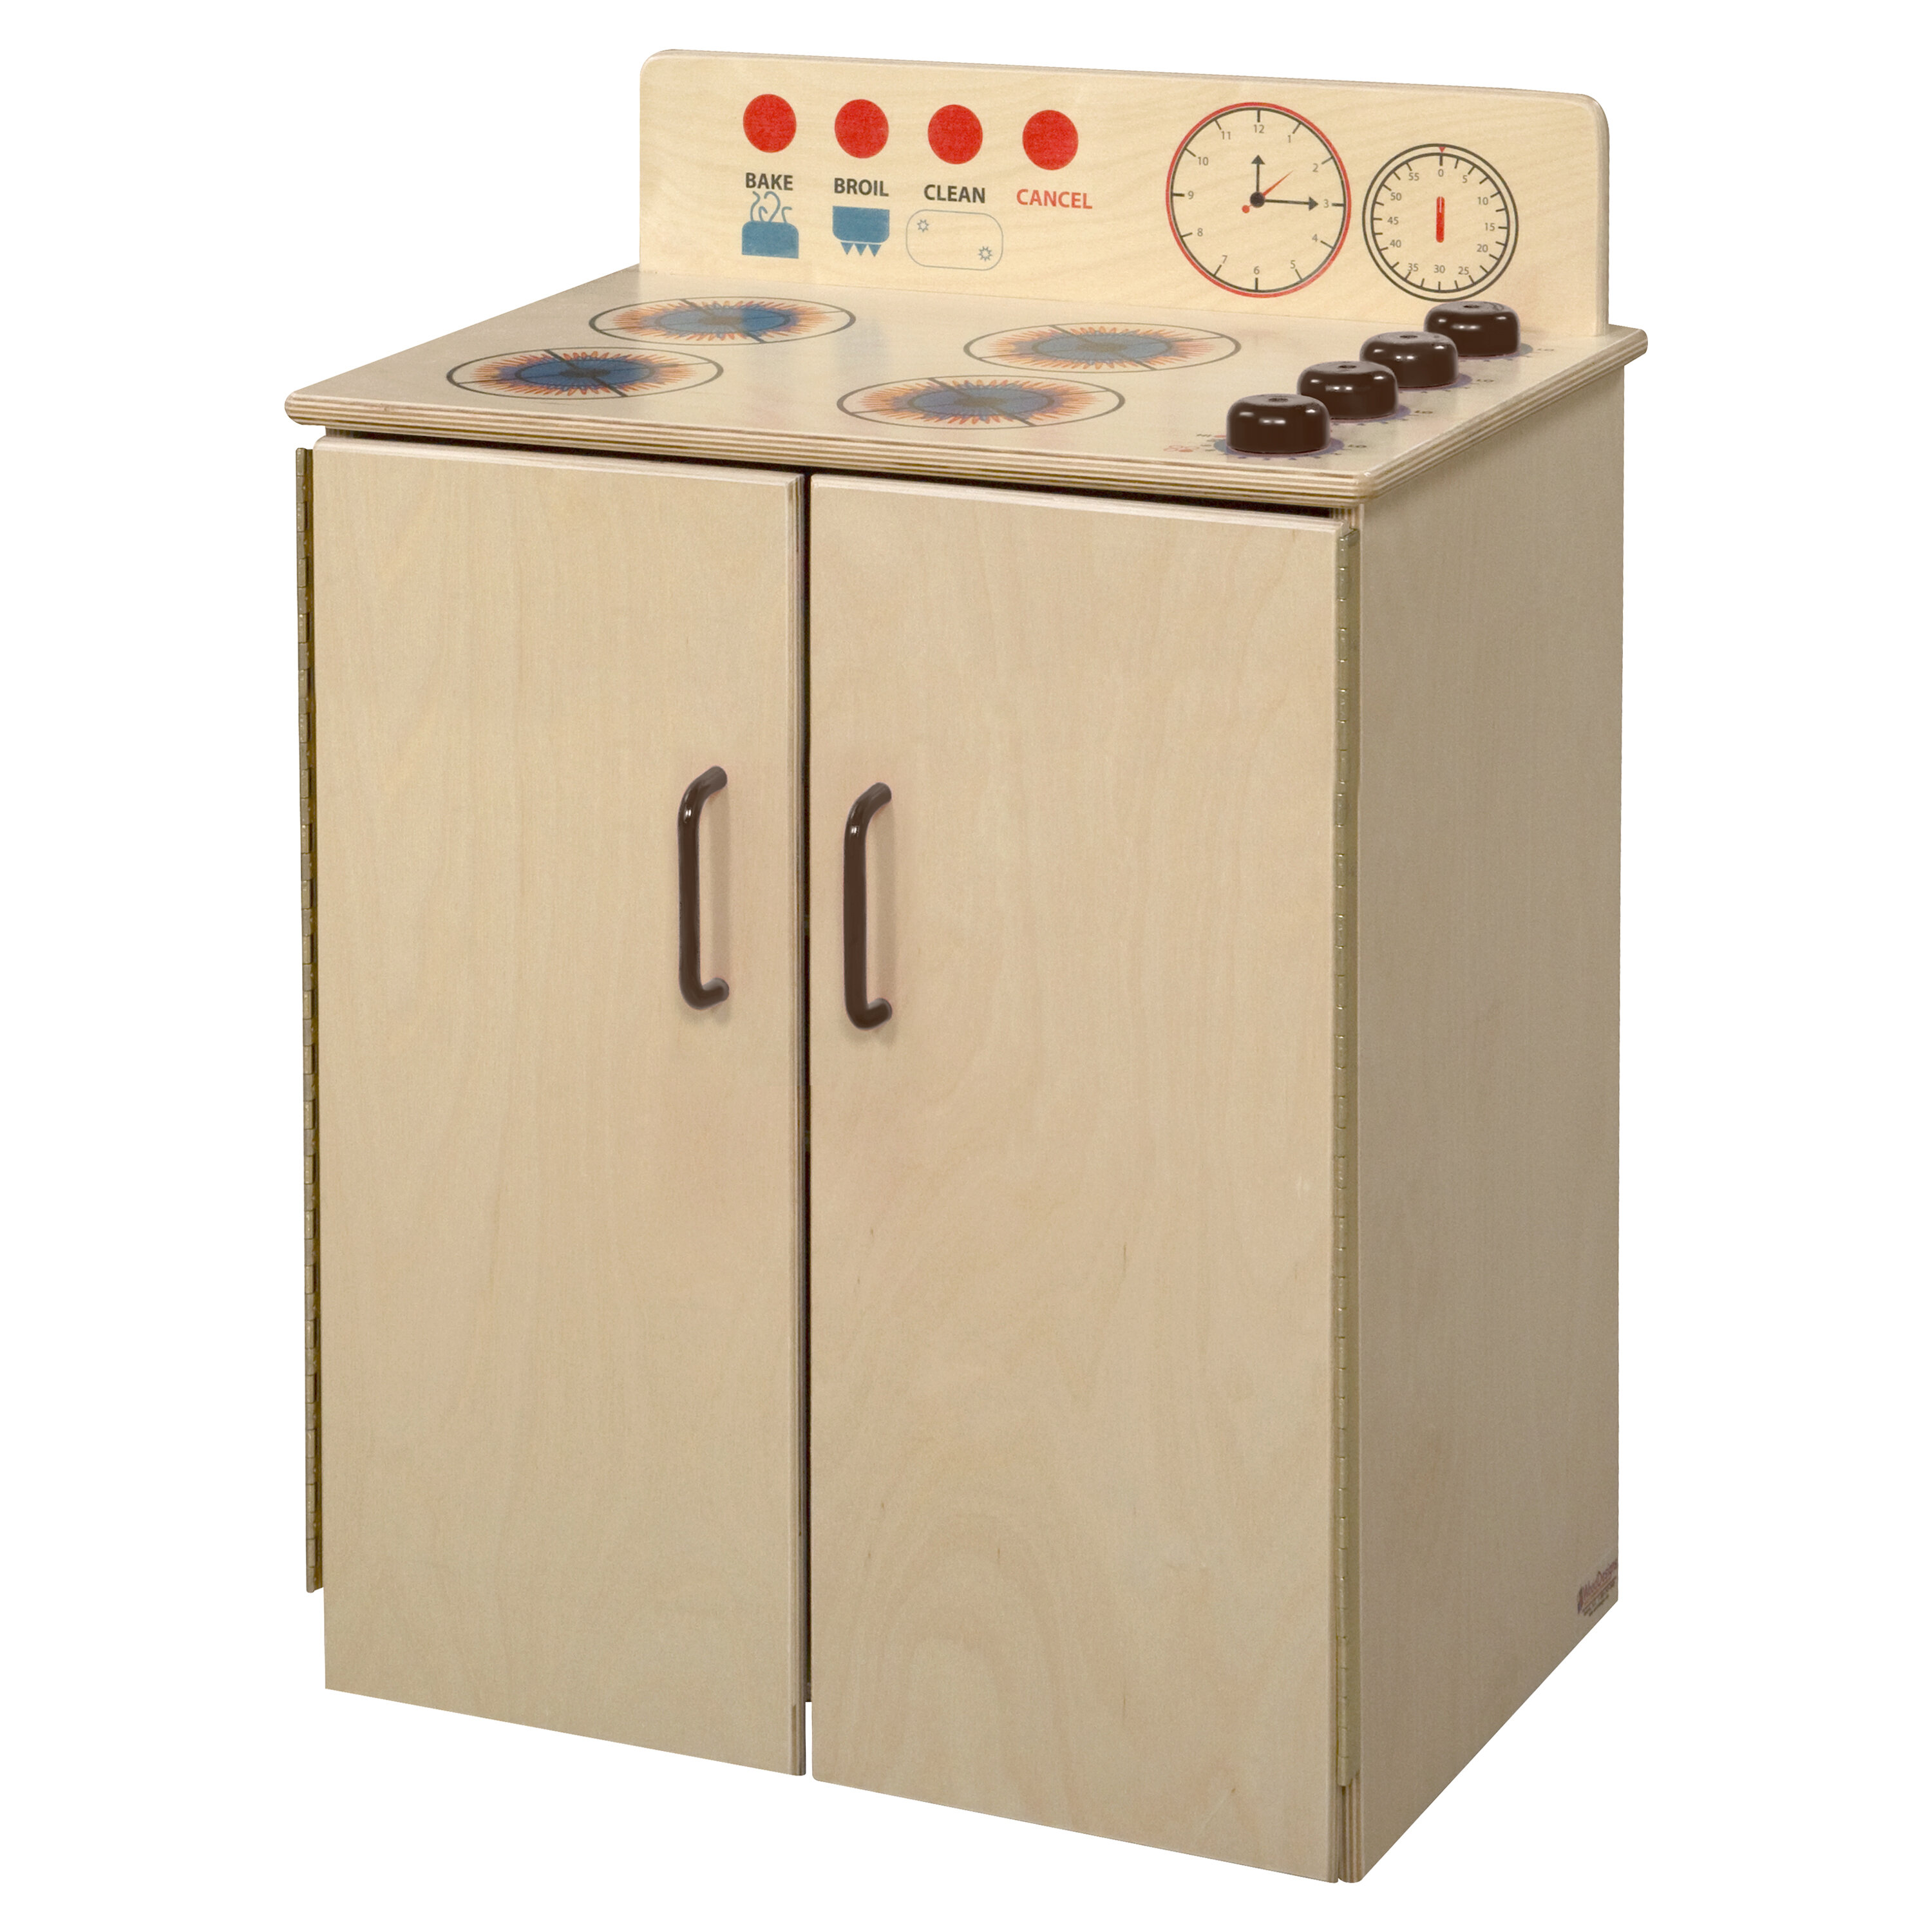 age range for play kitchen